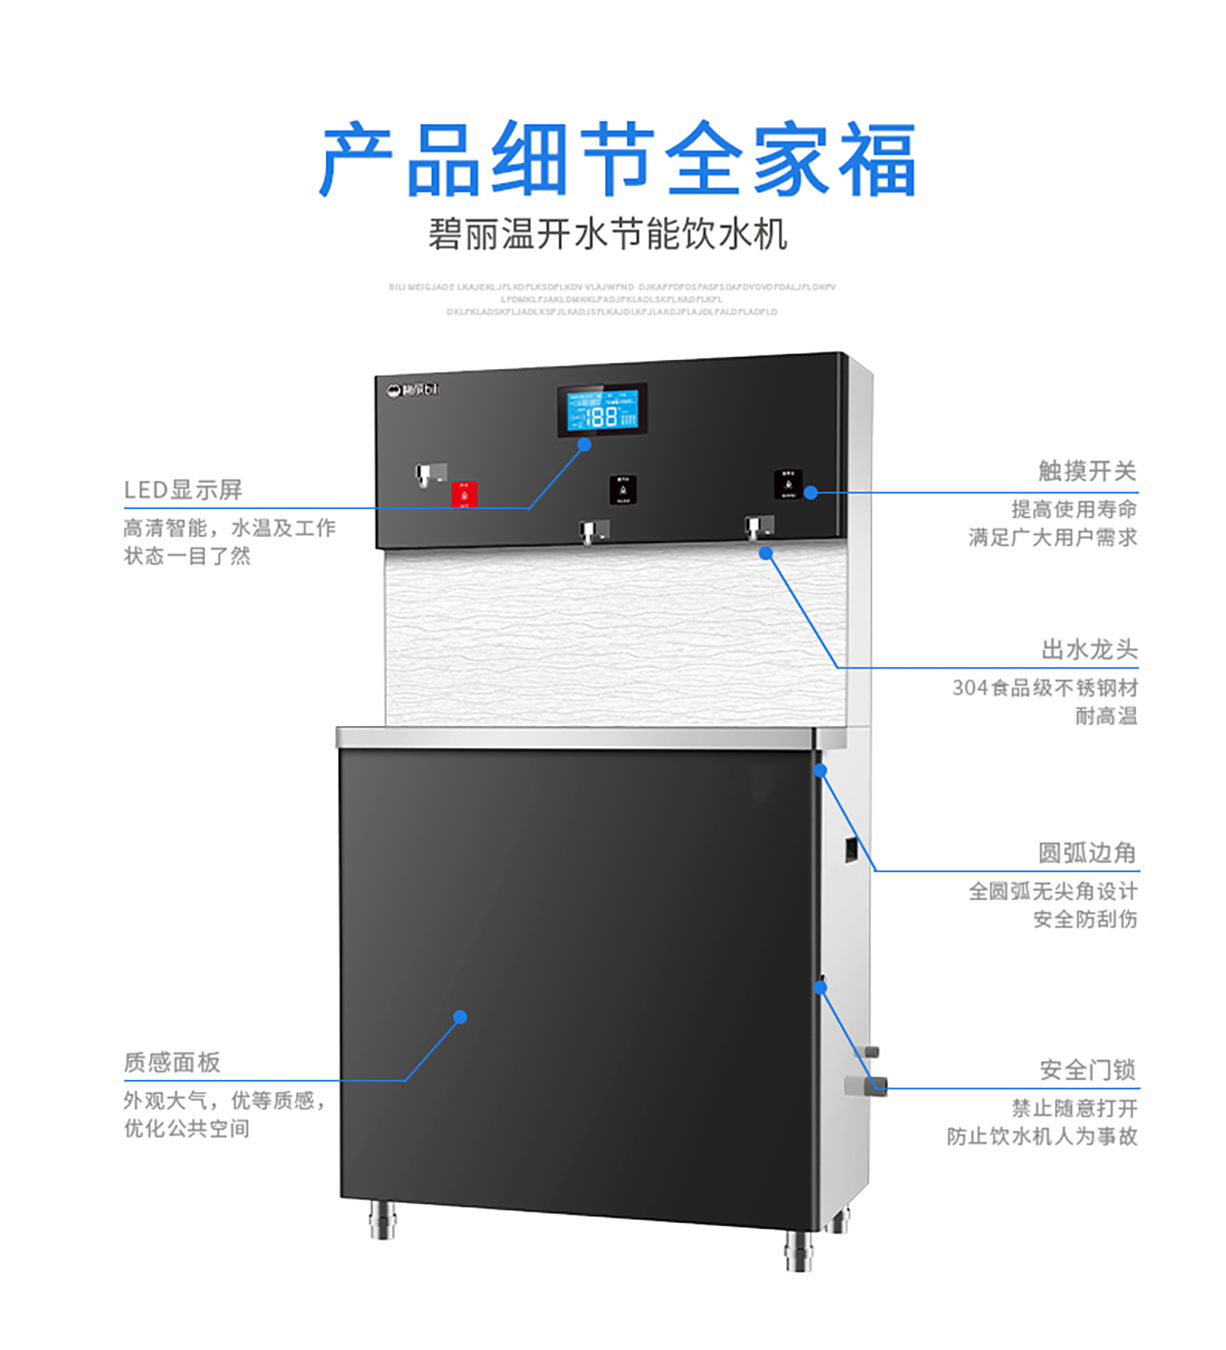 Brilliant JO-3Q5B-RO reverse emphasis straight water separator, school hospital, factory, office building, applicable